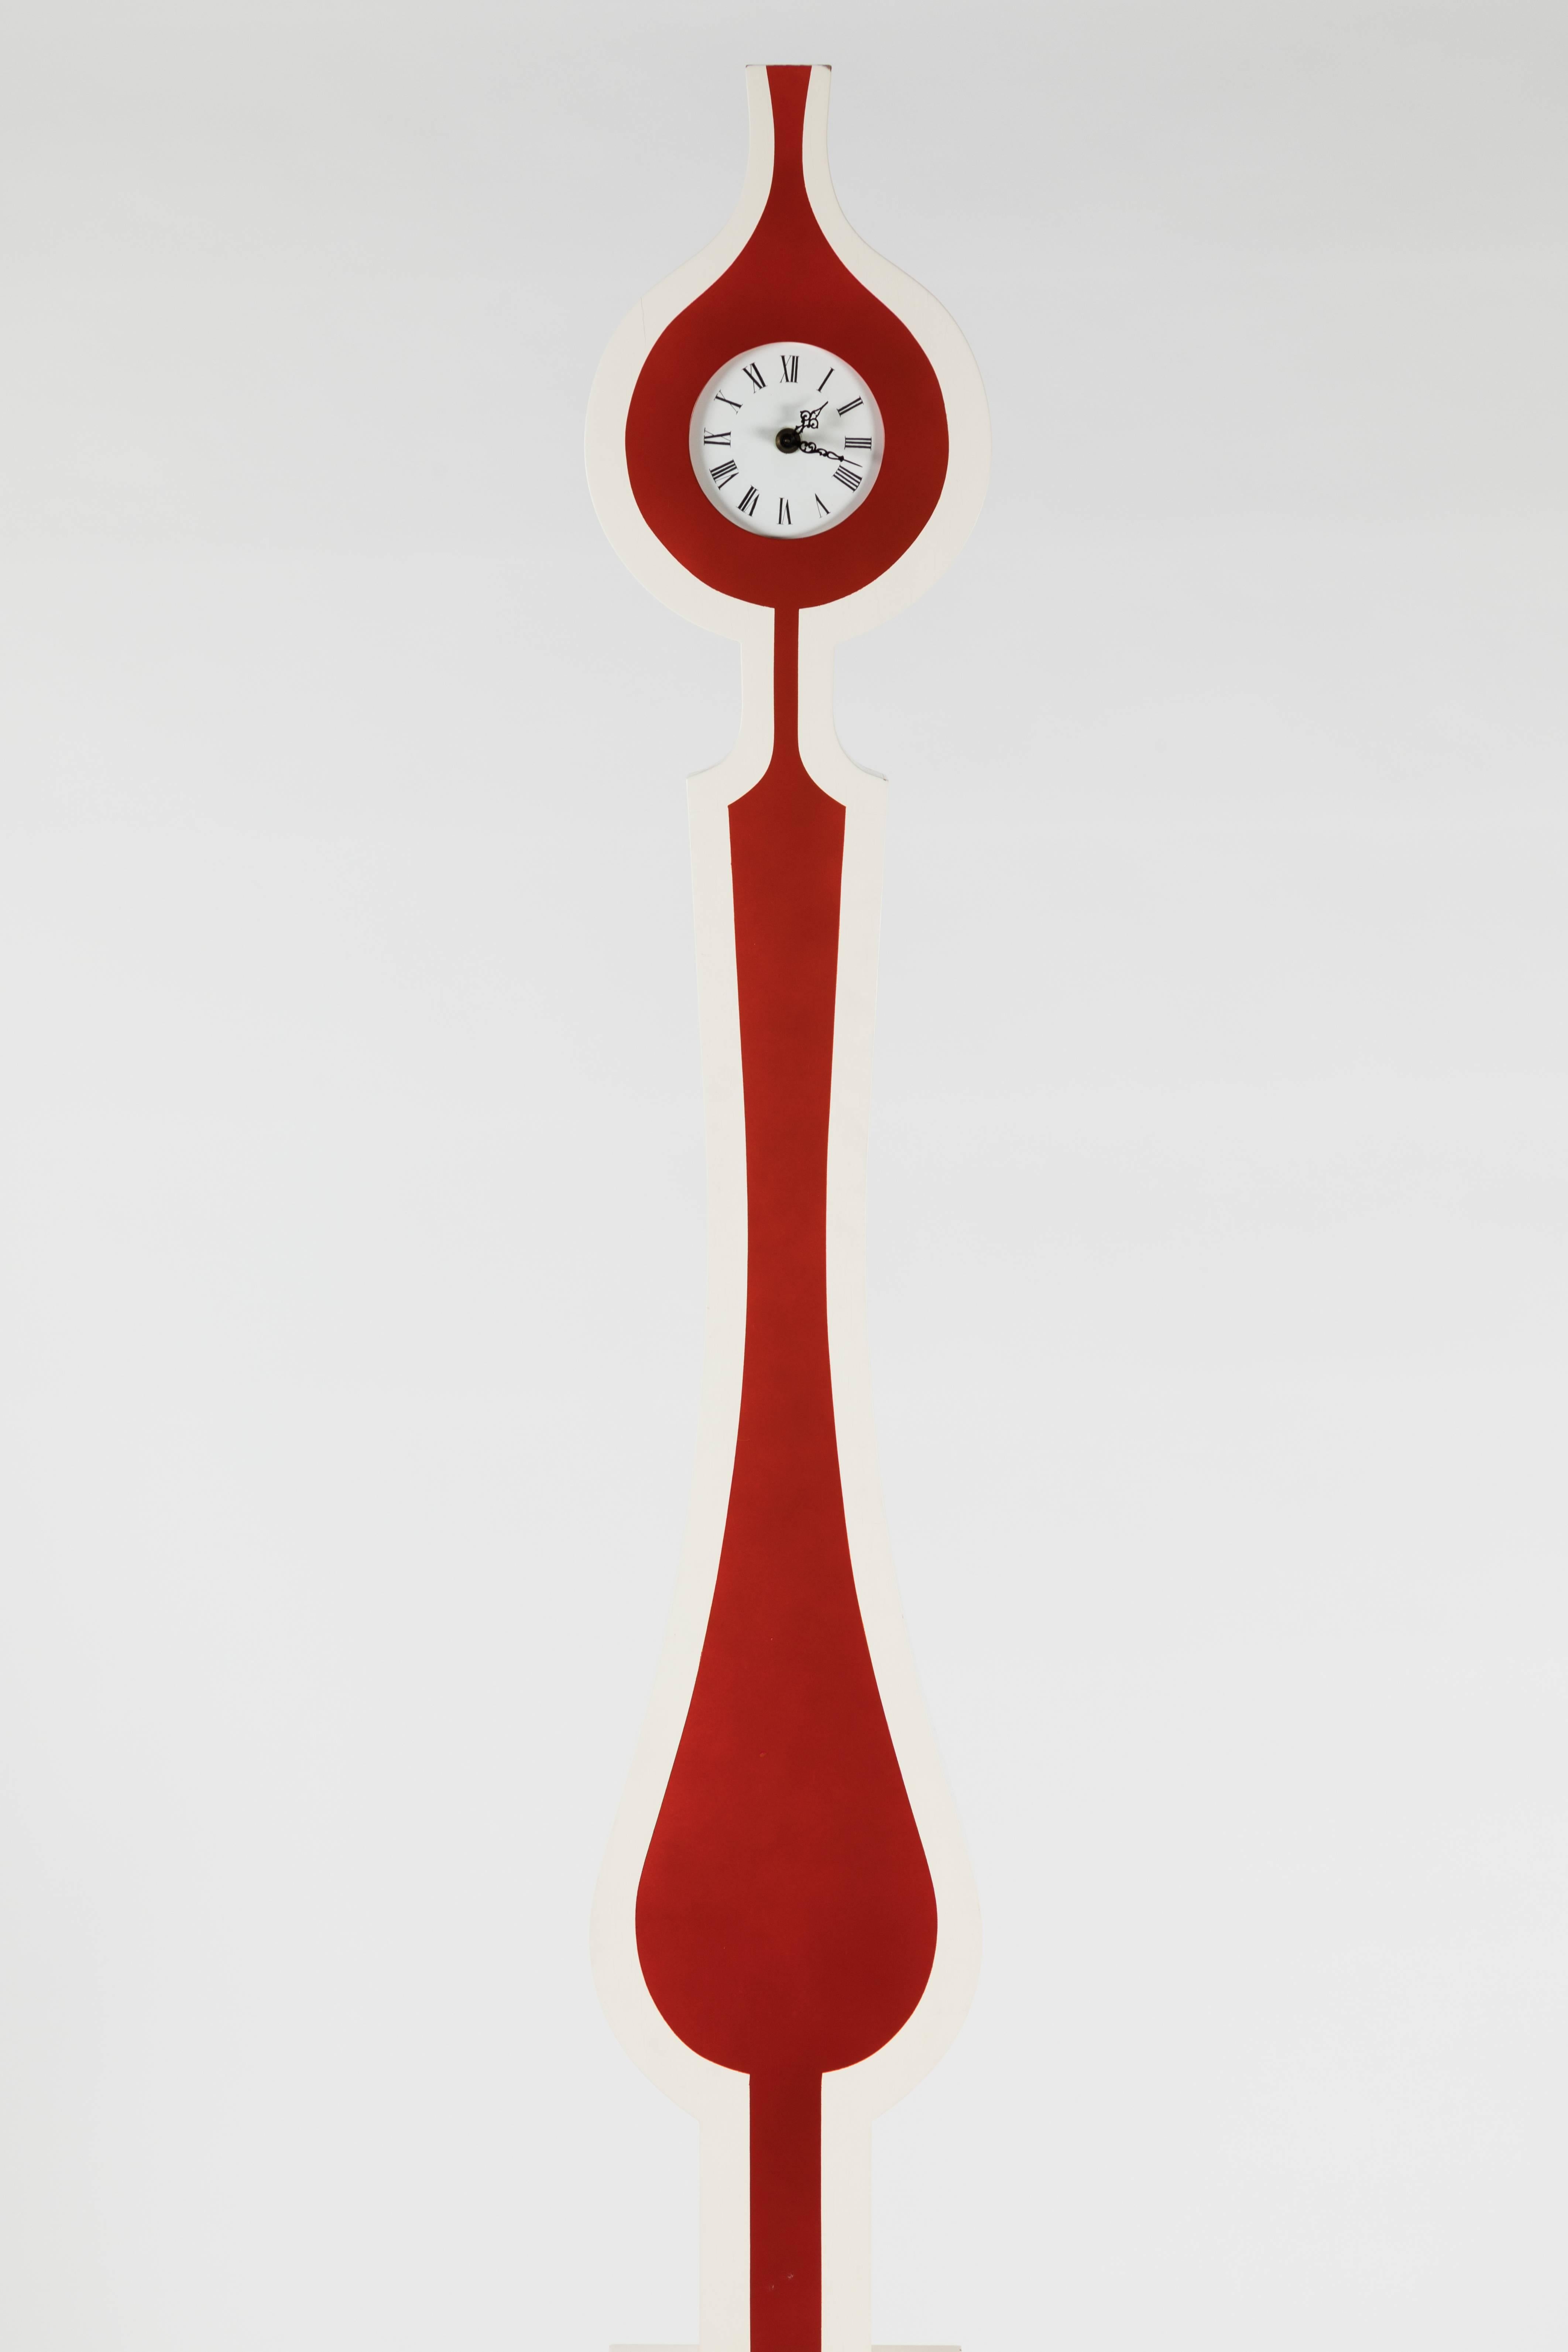 A truly rare find, this electric clock with the original finish is a standout.
Brilliant red enamel outlined in white enamel finishes the exterior case of the clock, while the original electronic movement has a traditional enameled face. The